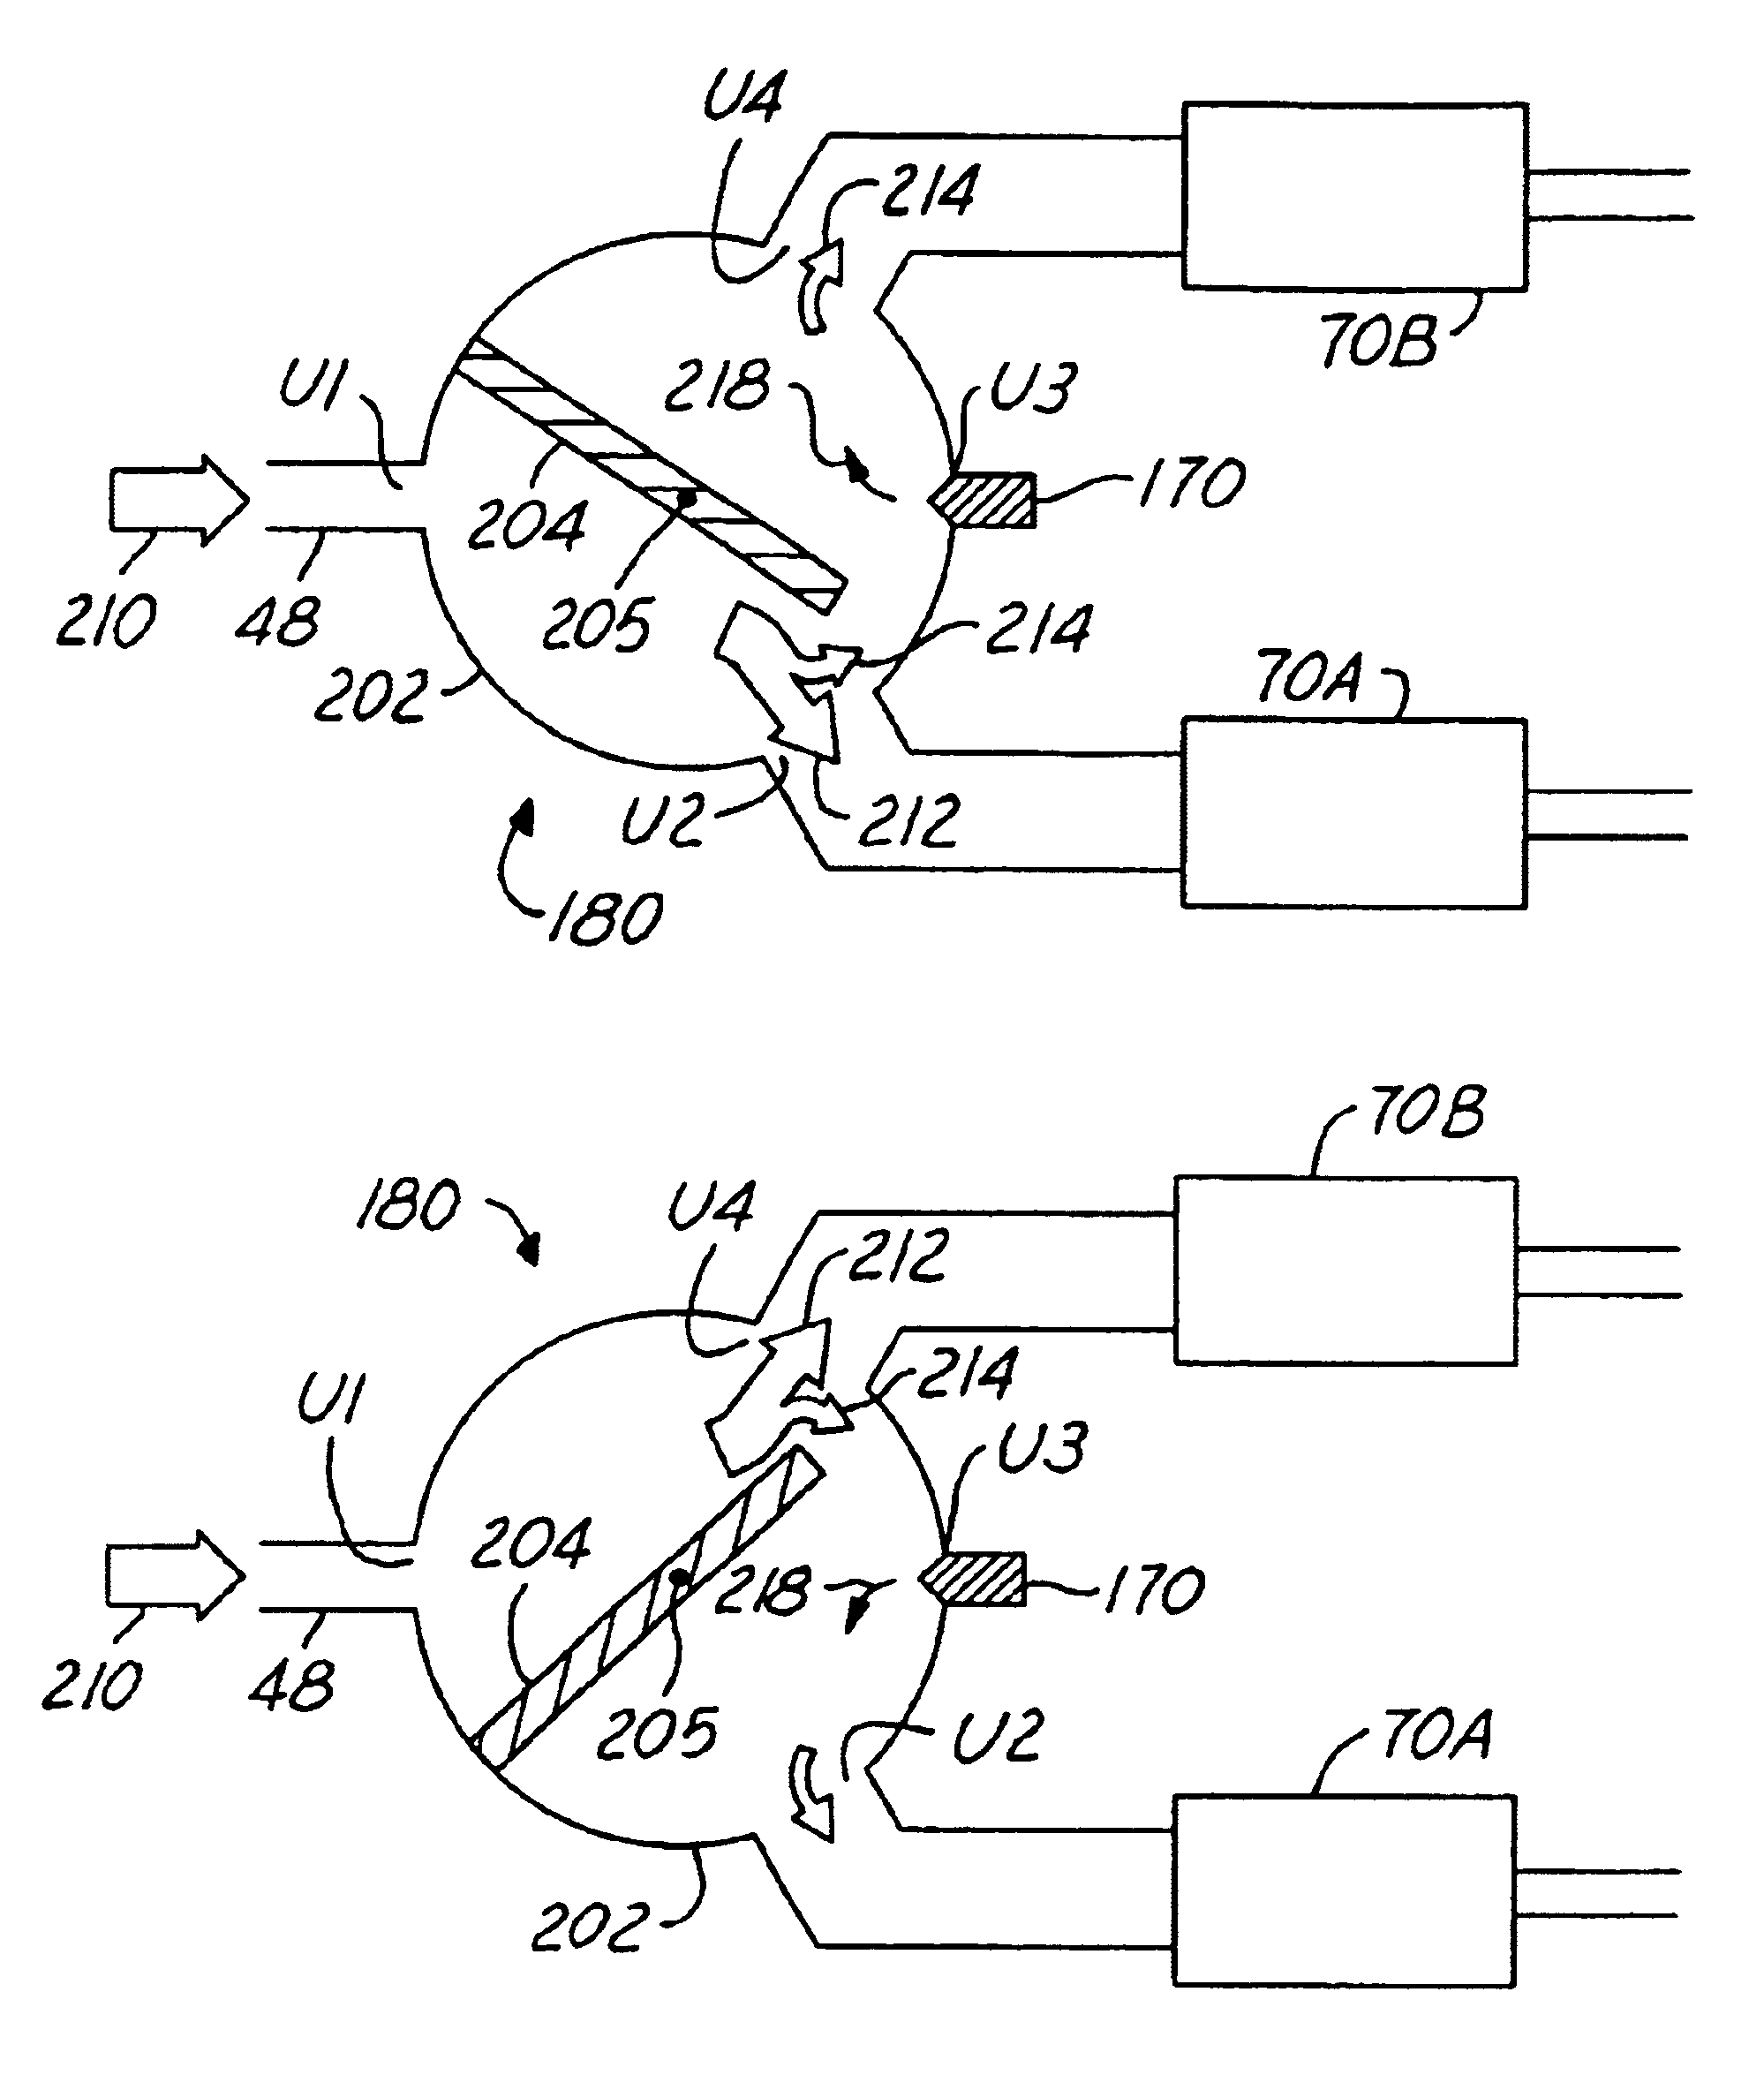 Diesel engine system for use with emission control device